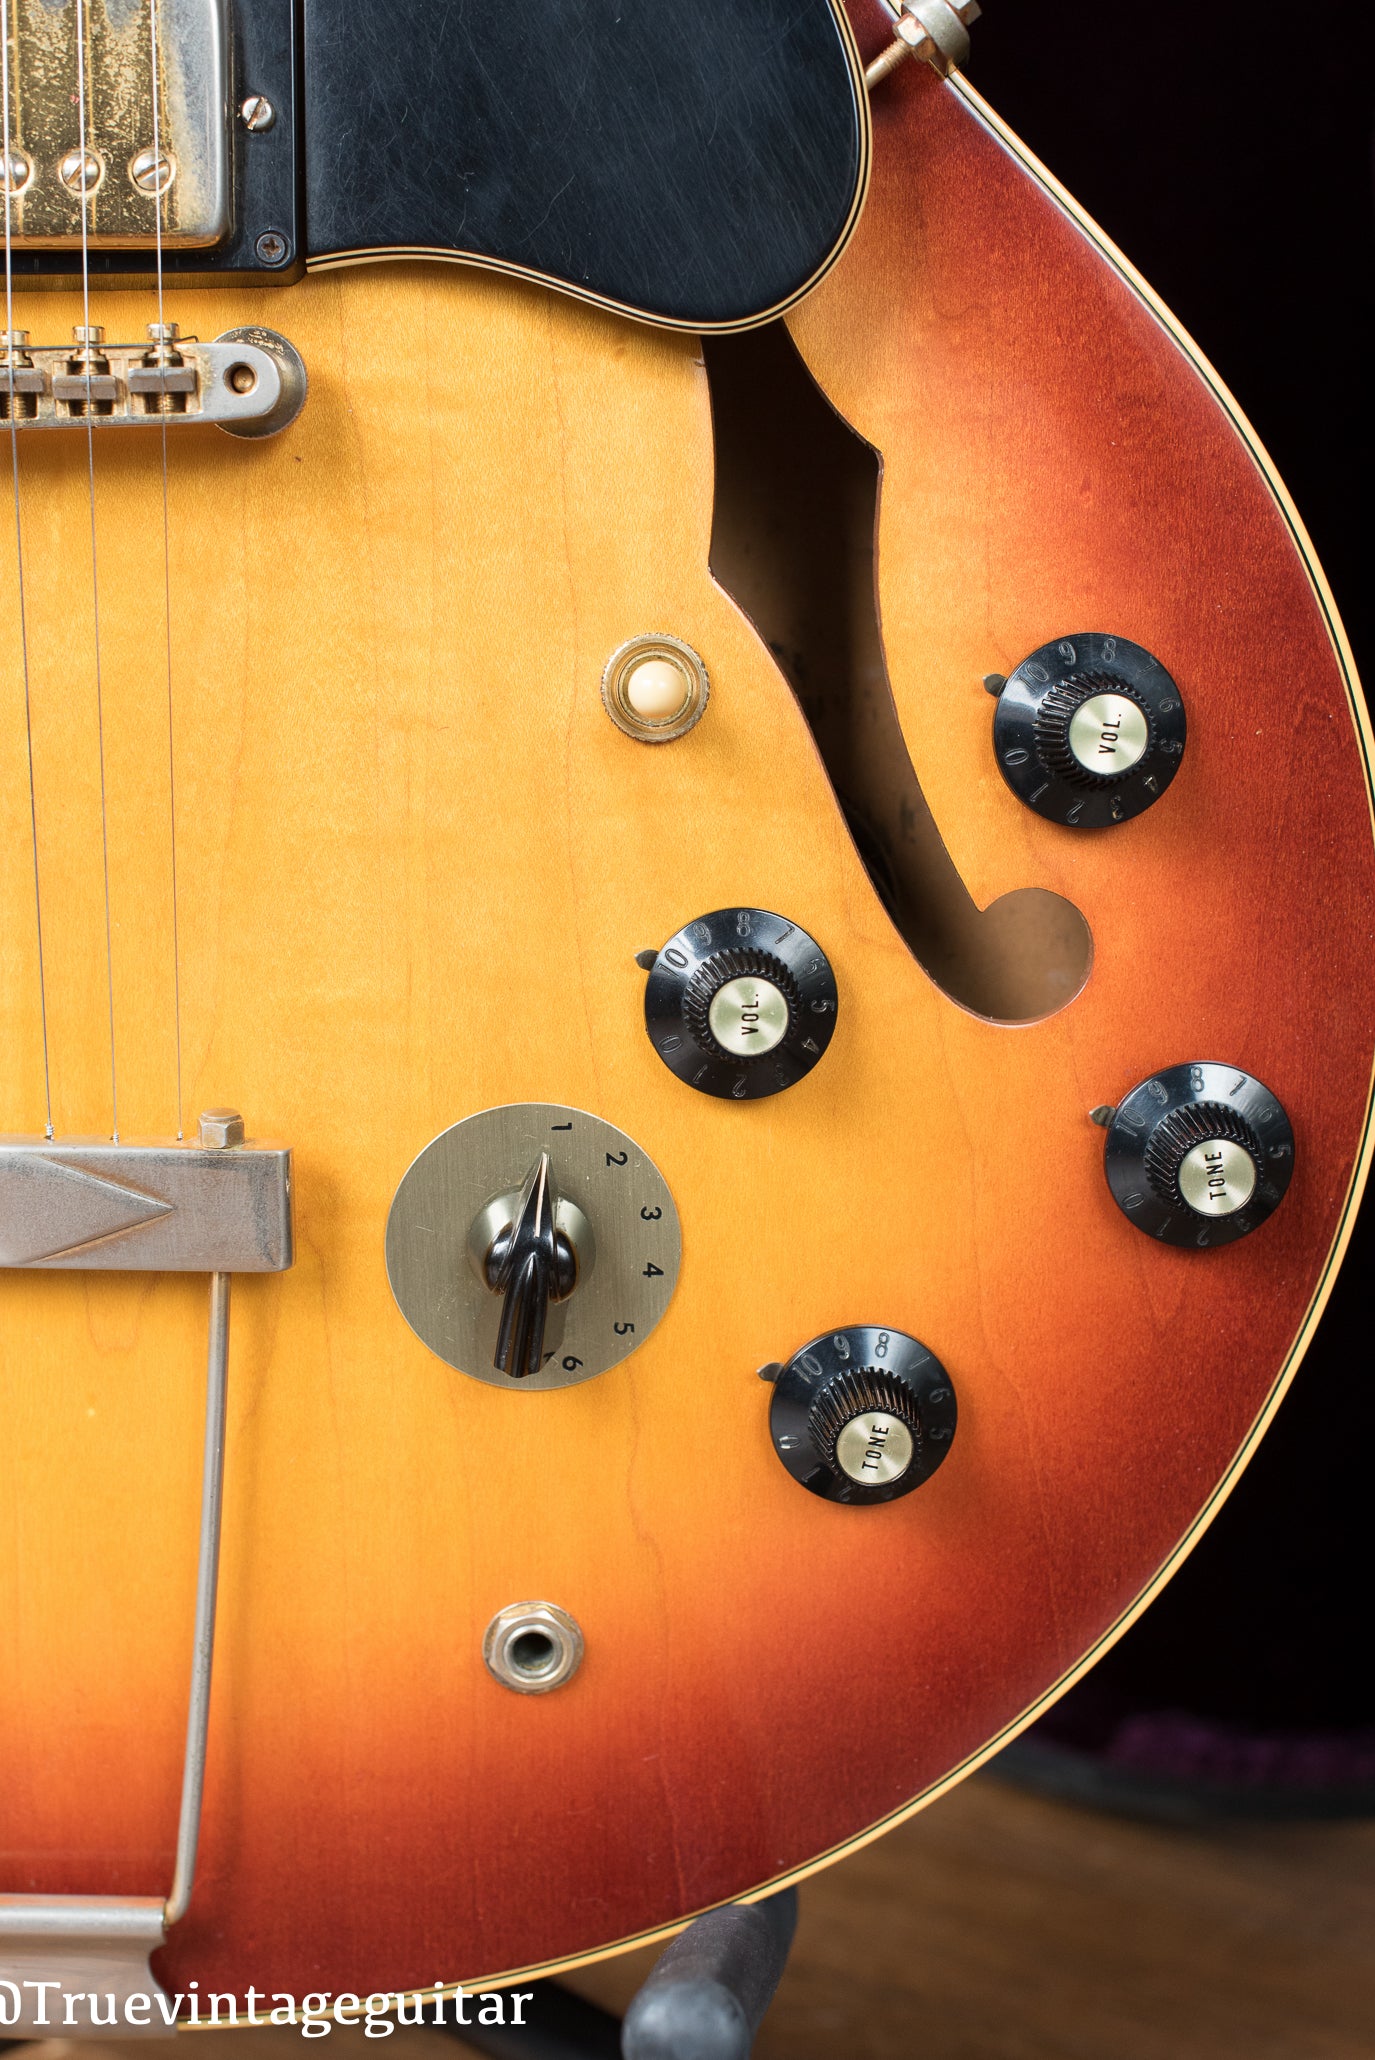 Witch hat volume and tone knobs, varitone switch, Vintage 1972 Gibson ES-345 Stereo Sunburst